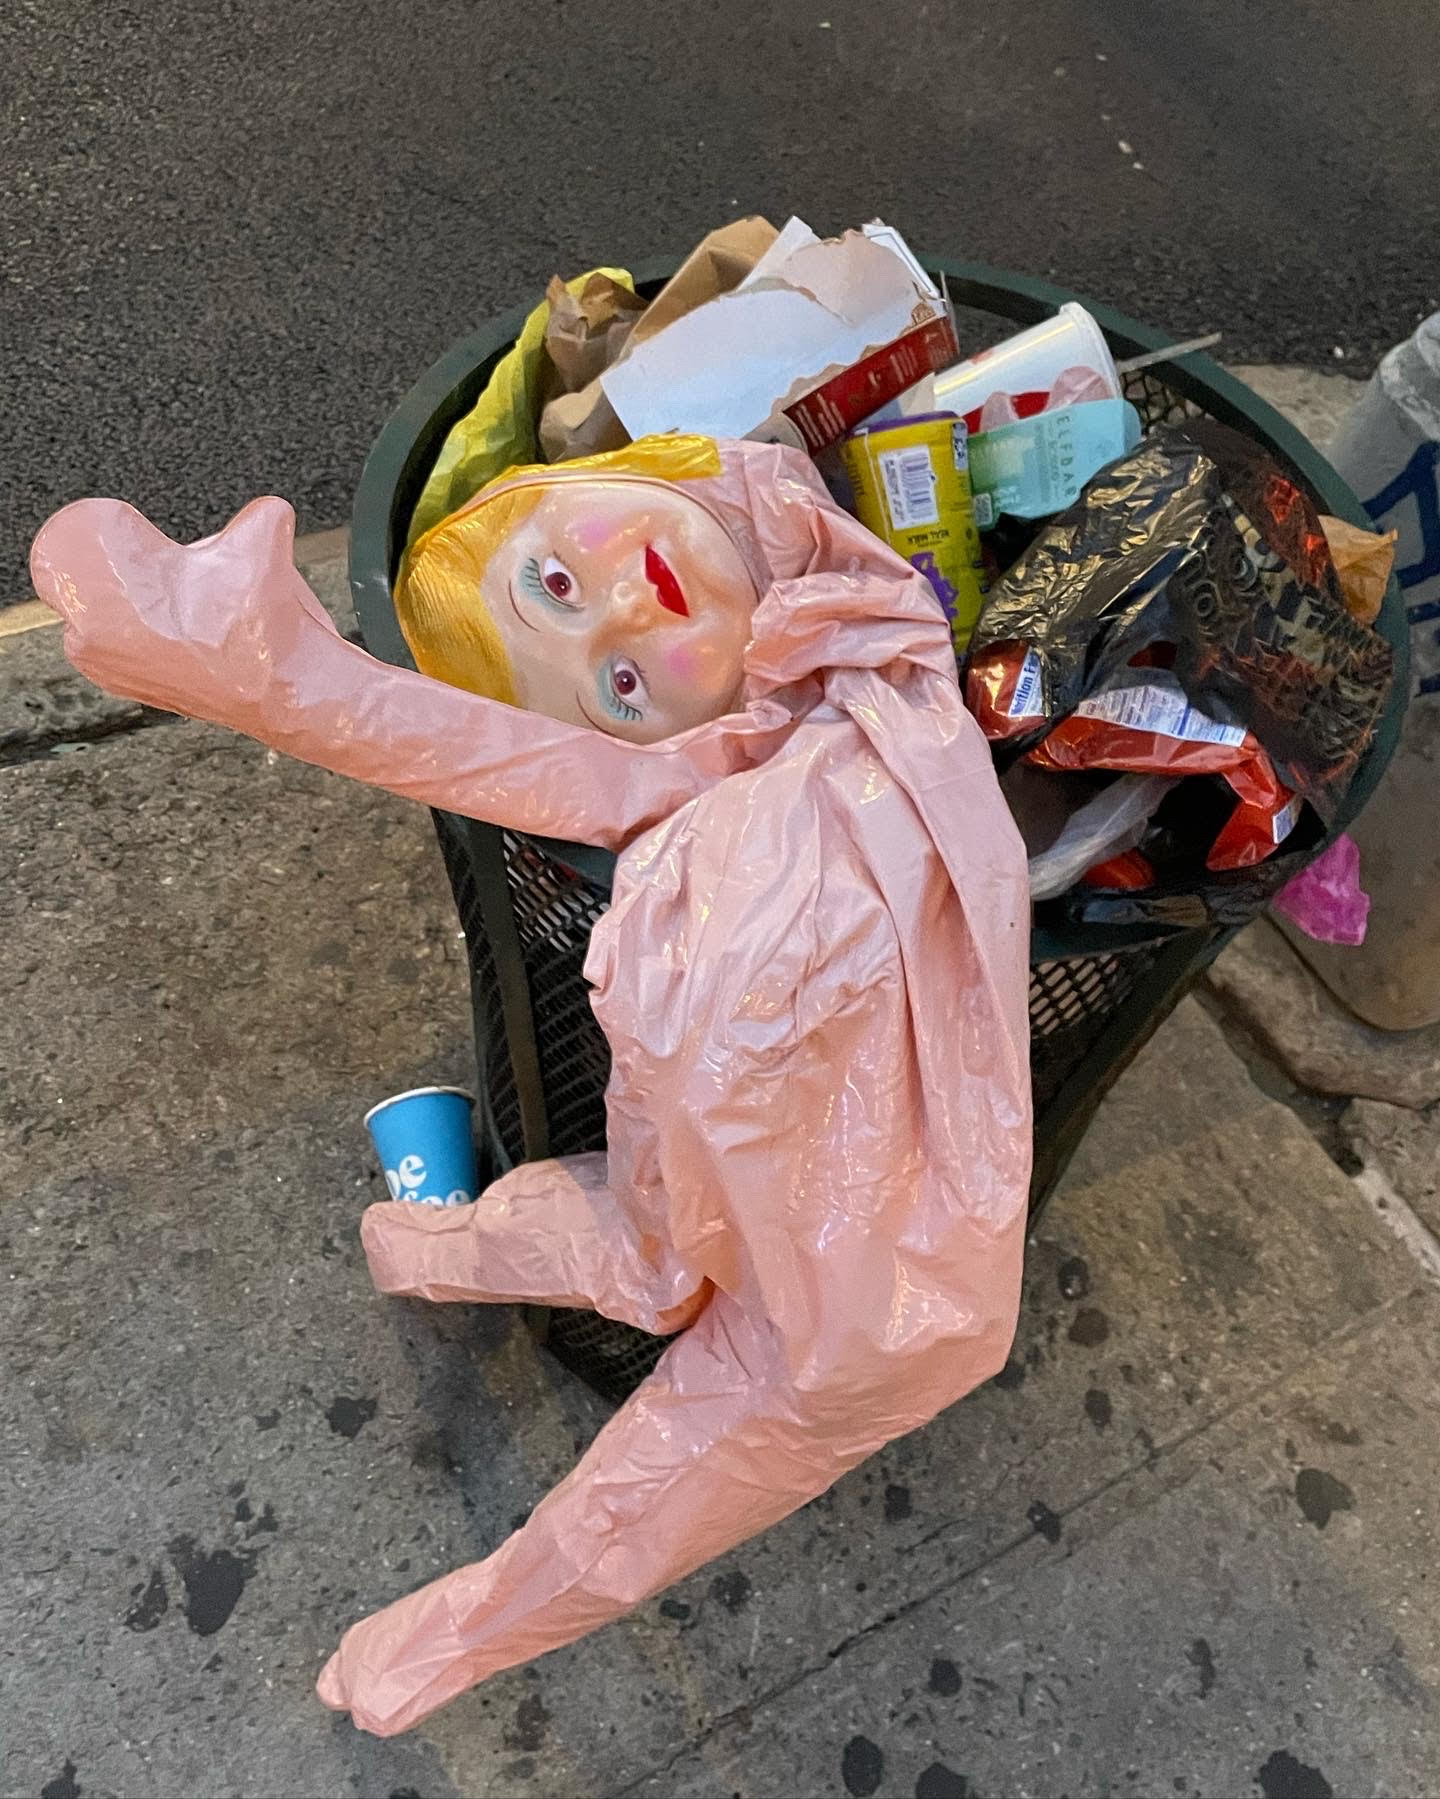 Blow up doll in Hell's Kitchen, New York City.